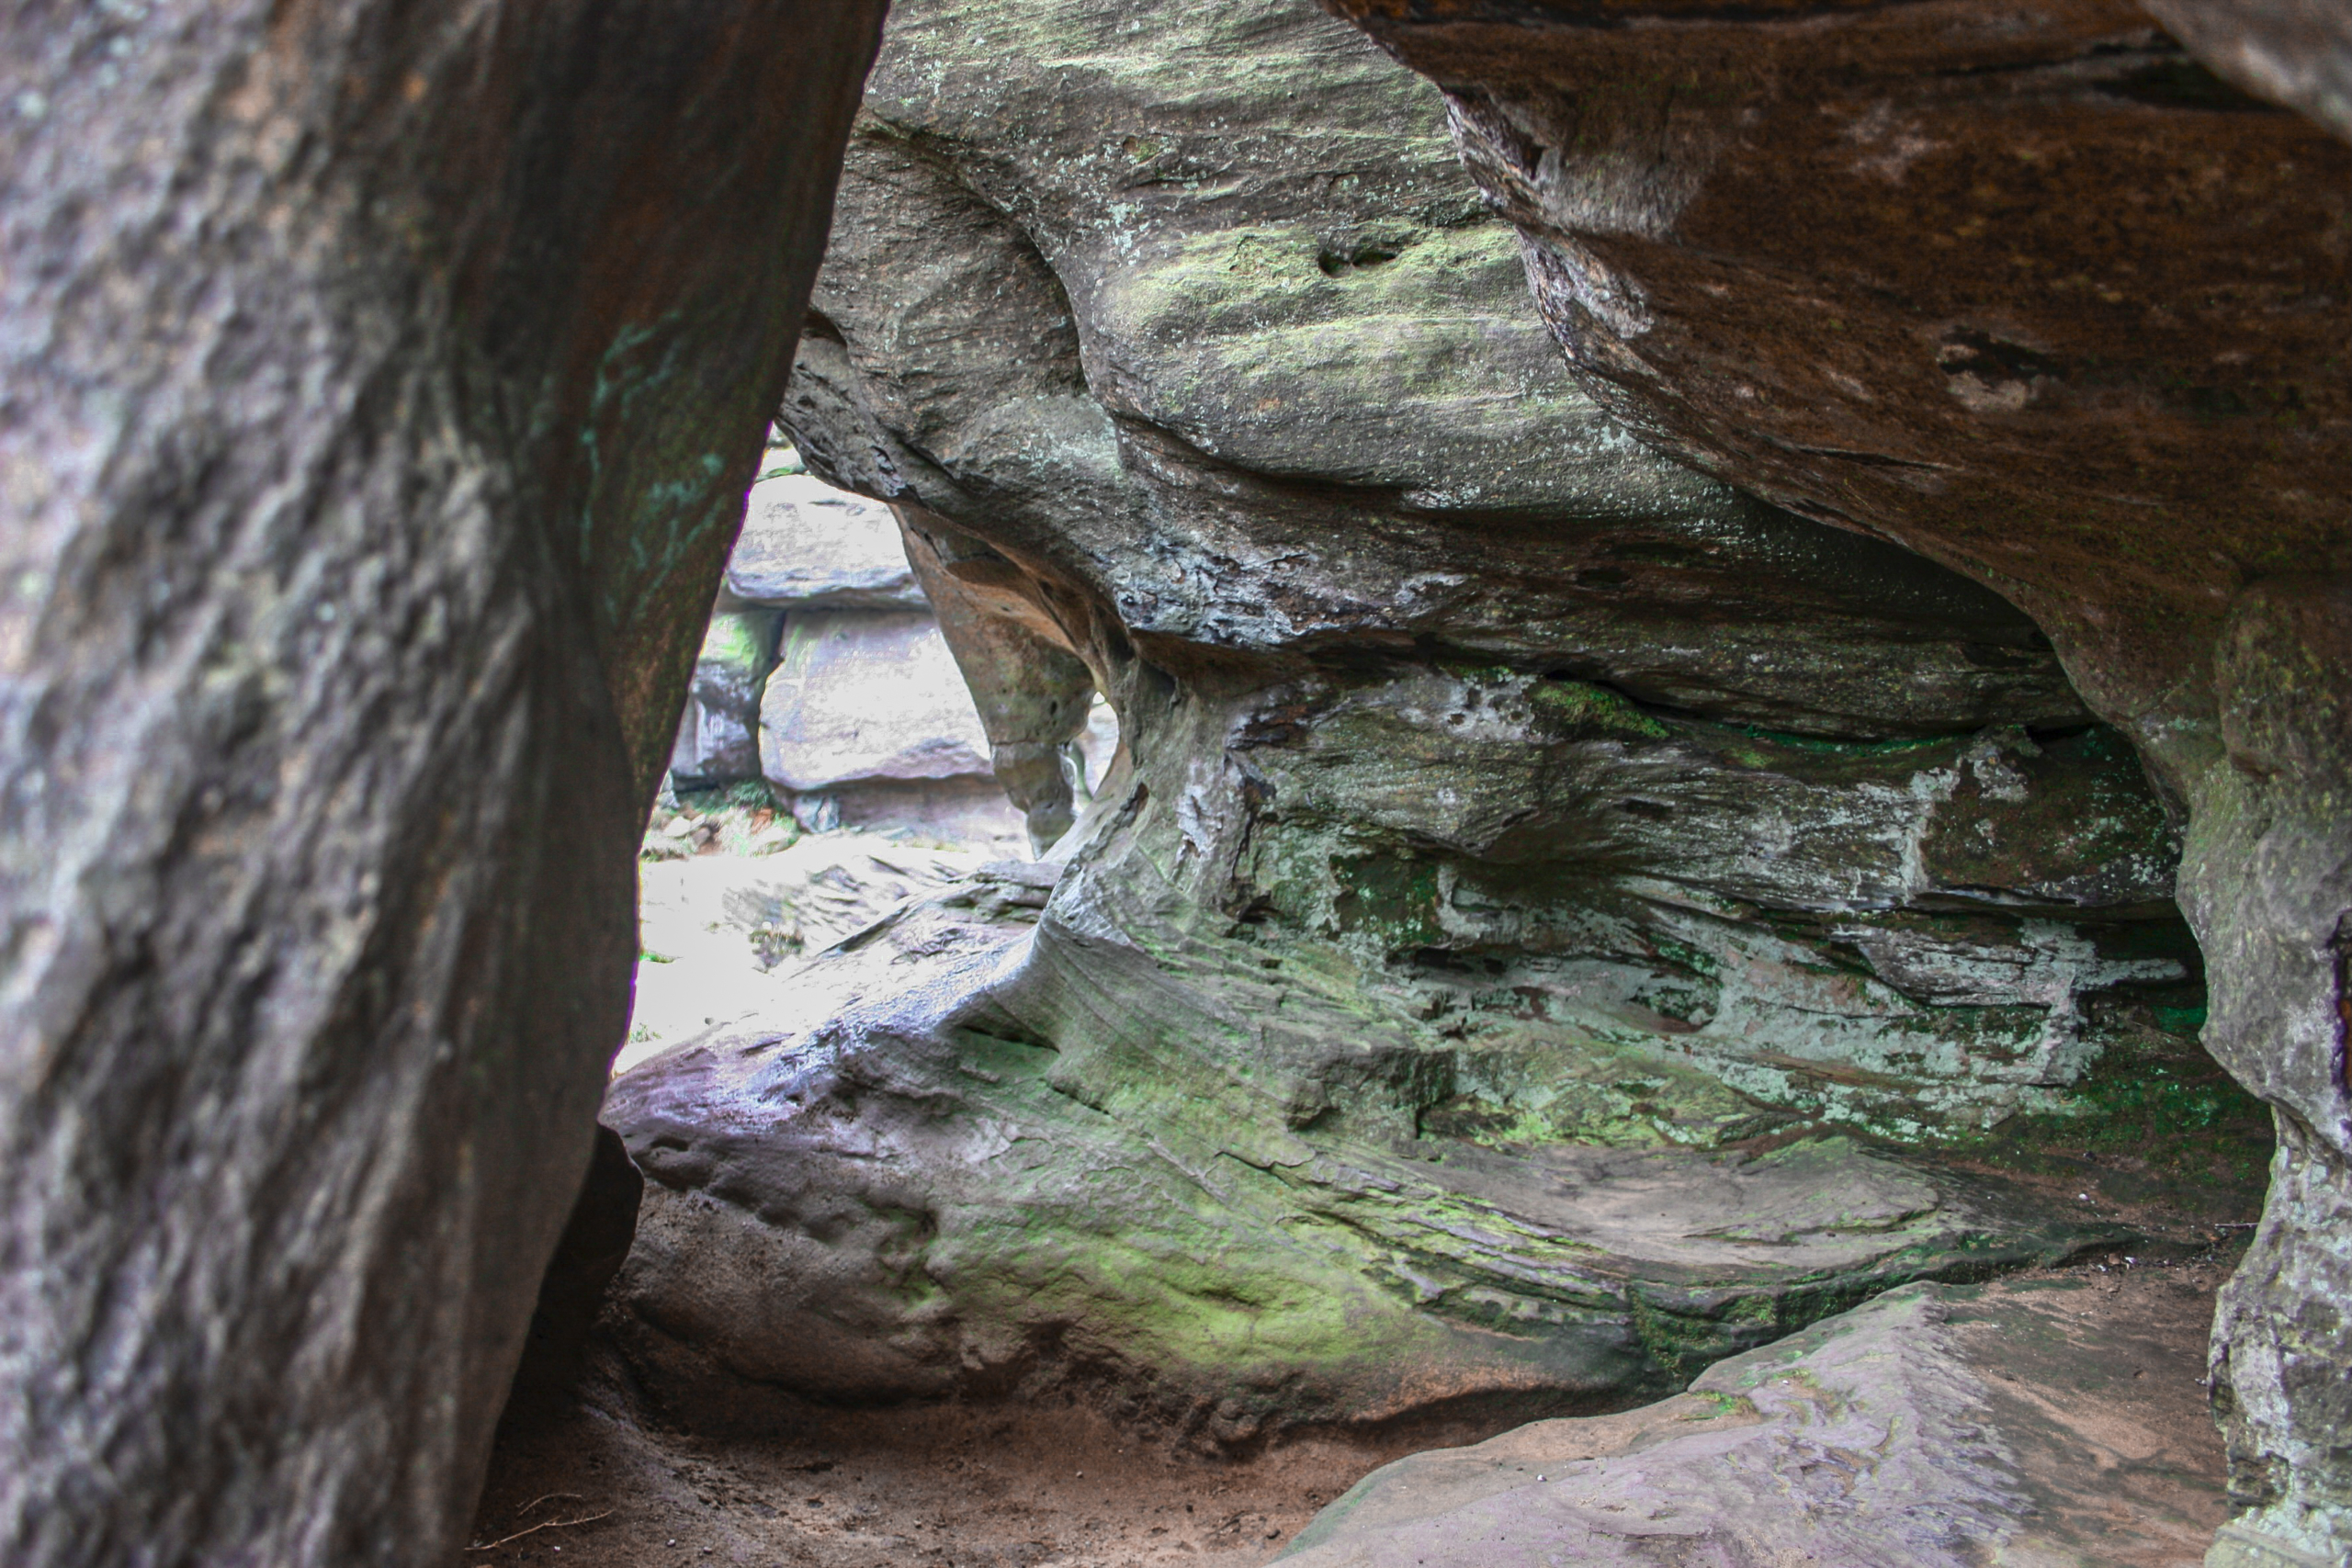 Inside the rock formations at Brimham